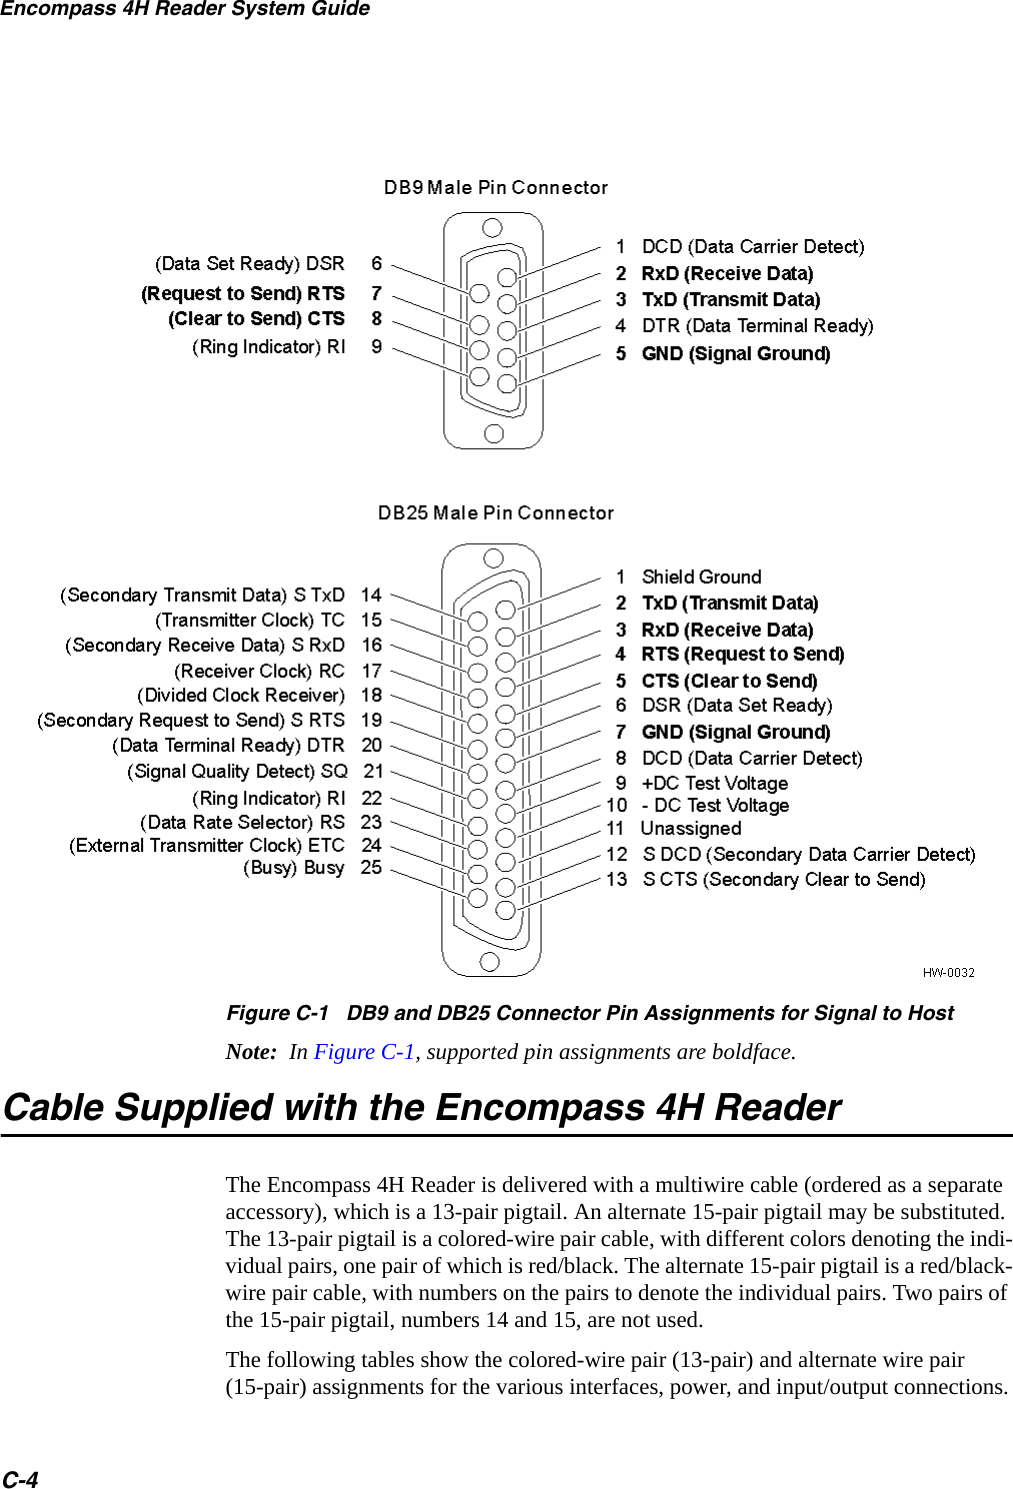 Encompass 4H Reader System GuideC-4 Figure C-1   DB9 and DB25 Connector Pin Assignments for Signal to HostNote:  In Figure C-1, supported pin assignments are boldface.Cable Supplied with the Encompass 4H Reader The Encompass 4H Reader is delivered with a multiwire cable (ordered as a separate accessory), which is a 13-pair pigtail. An alternate 15-pair pigtail may be substituted. The 13-pair pigtail is a colored-wire pair cable, with different colors denoting the indi-vidual pairs, one pair of which is red/black. The alternate 15-pair pigtail is a red/black-wire pair cable, with numbers on the pairs to denote the individual pairs. Two pairs of the 15-pair pigtail, numbers 14 and 15, are not used.The following tables show the colored-wire pair (13-pair) and alternate wire pair(15-pair) assignments for the various interfaces, power, and input/output connections.